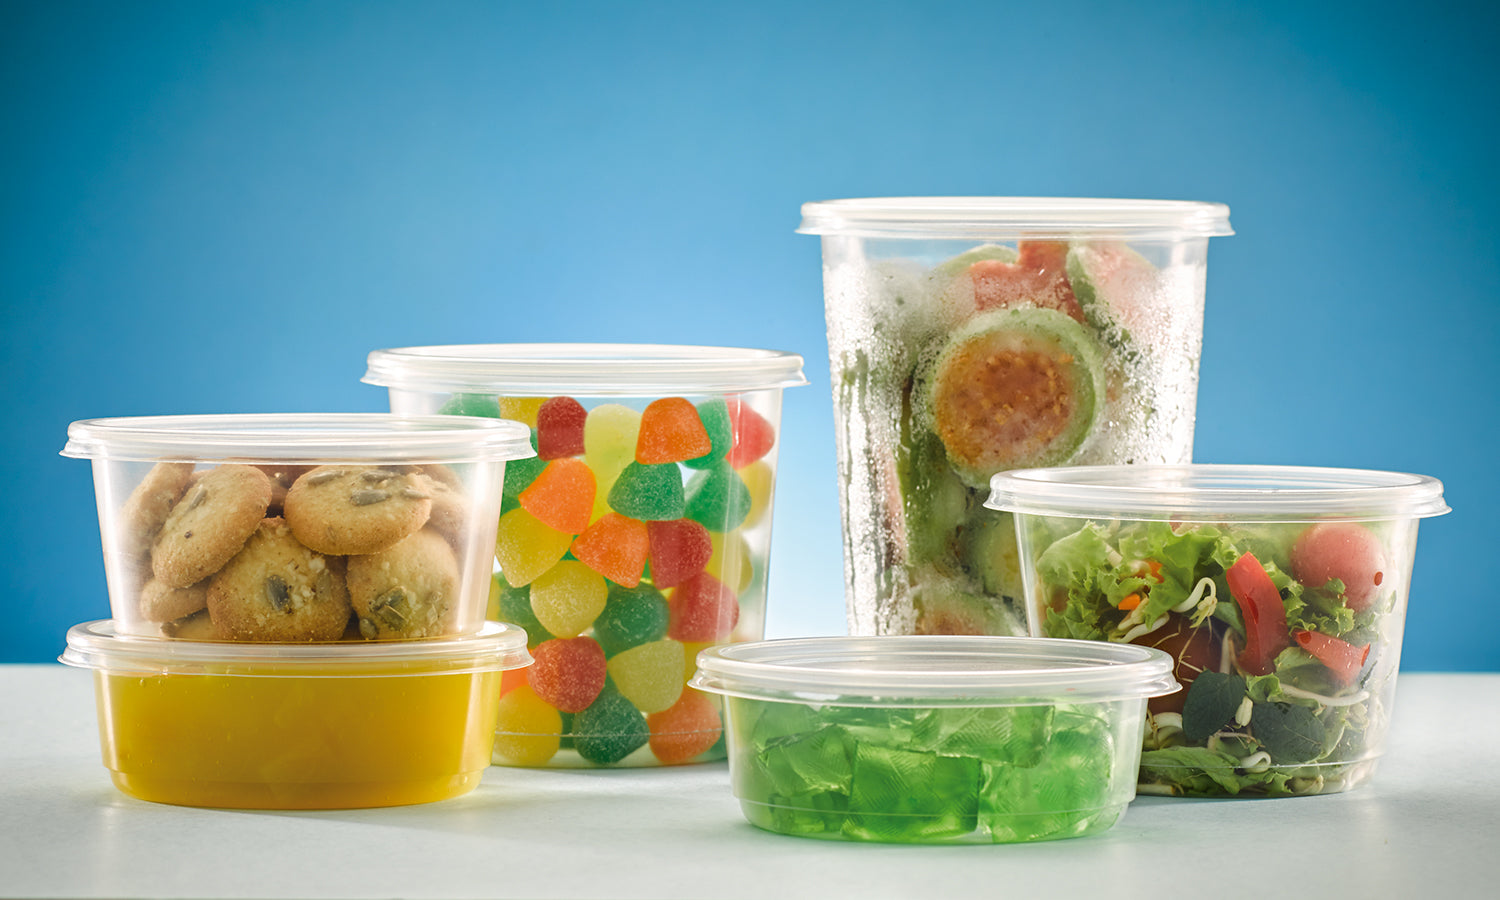 Types of Deli Containers - The Most Versatile Plastic Takeout Containe